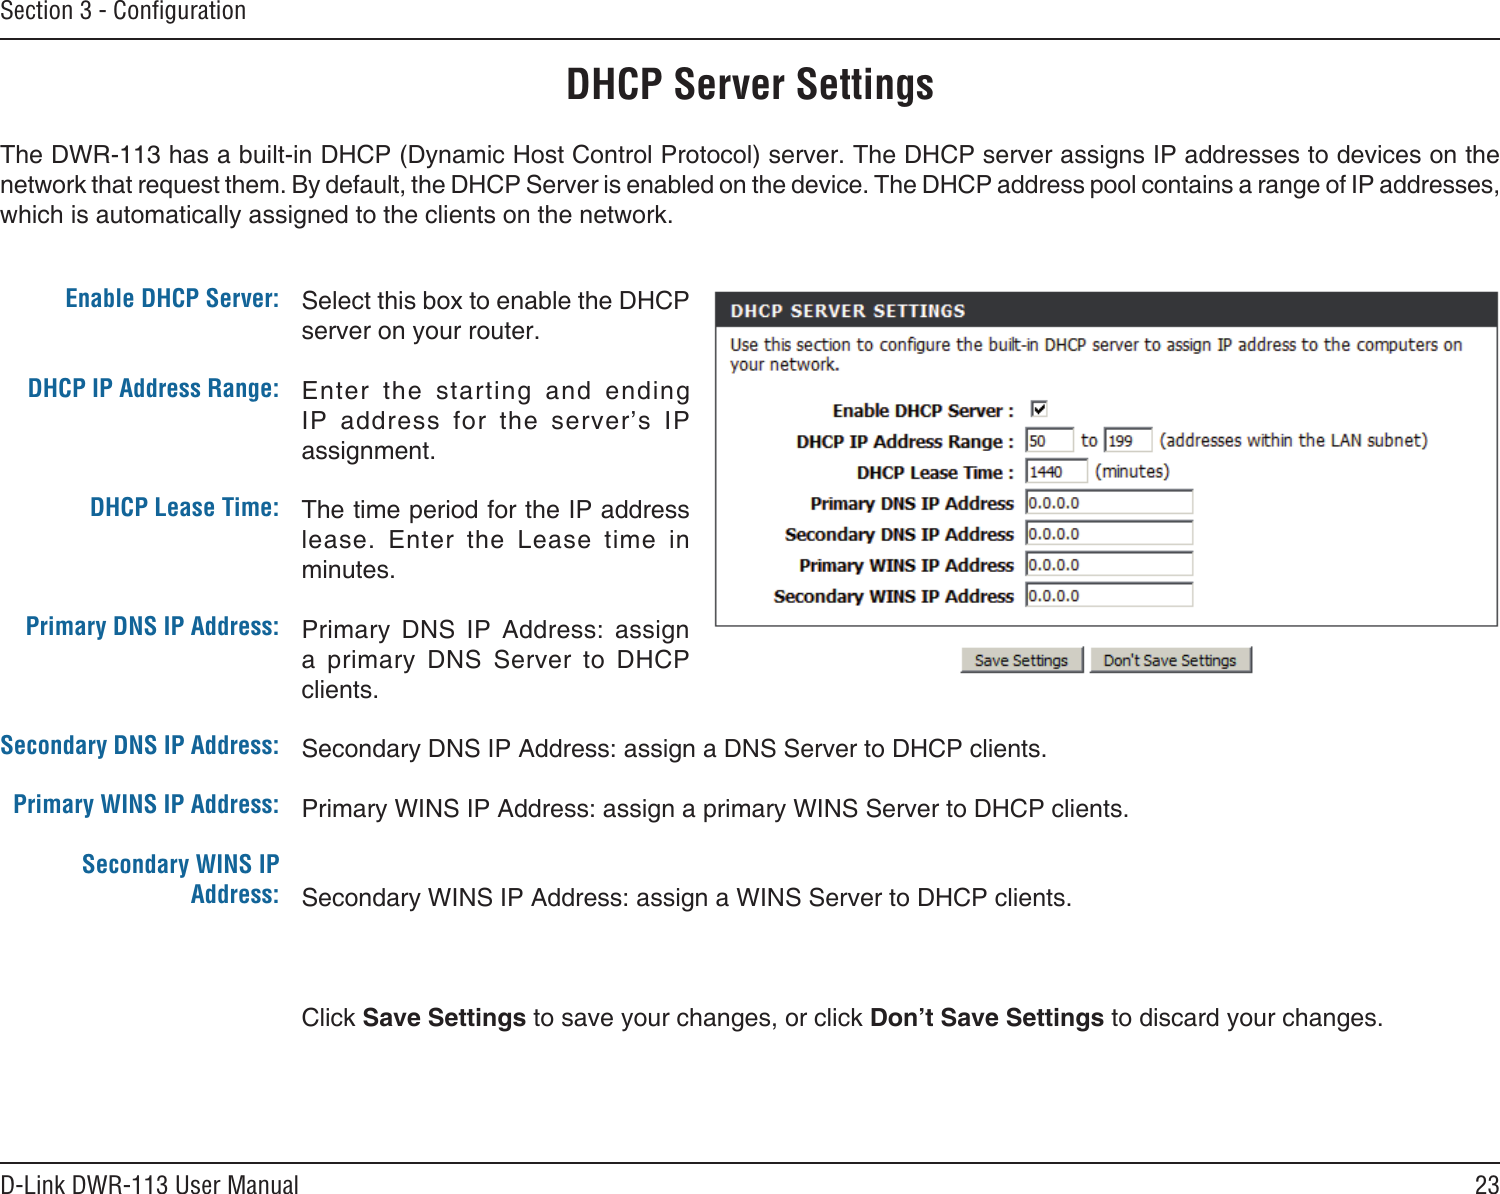 23D-Link DWR-113 User ManualSection 3 - ConﬁgurationSelect this box to enable the DHCP server on your router. Enter  the  starting  and  ending IP  address  for  the  server’s  IP assignment.The time period for the IP address lease.  Enter  the  Lease  time  in minutes.Primary  DNS  IP  Address:  assign a  primary  DNS  Server  to  DHCP clients.Secondary DNS IP Address: assign a DNS Server to DHCP clients.Primary WINS IP Address: assign a primary WINS Server to DHCP clients. Secondary WINS IP Address: assign a WINS Server to DHCP clients.Click Save Settings to save your changes, or click Don’t Save Settings to discard your changes.Enable DHCP Server: DHCP IP Address Range:DHCP Lease Time:Primary DNS IP Address:Secondary DNS IP Address:Primary WINS IP Address:Secondary WINS IP Address:DHCP Server SettingsThe DWR-113 has a built-in DHCP (Dynamic Host Control Protocol) server. The DHCP server assigns IP addresses to devices on the network that request them. By default, the DHCP Server is enabled on the device. The DHCP address pool contains a range of IP addresses, which is automatically assigned to the clients on the network.